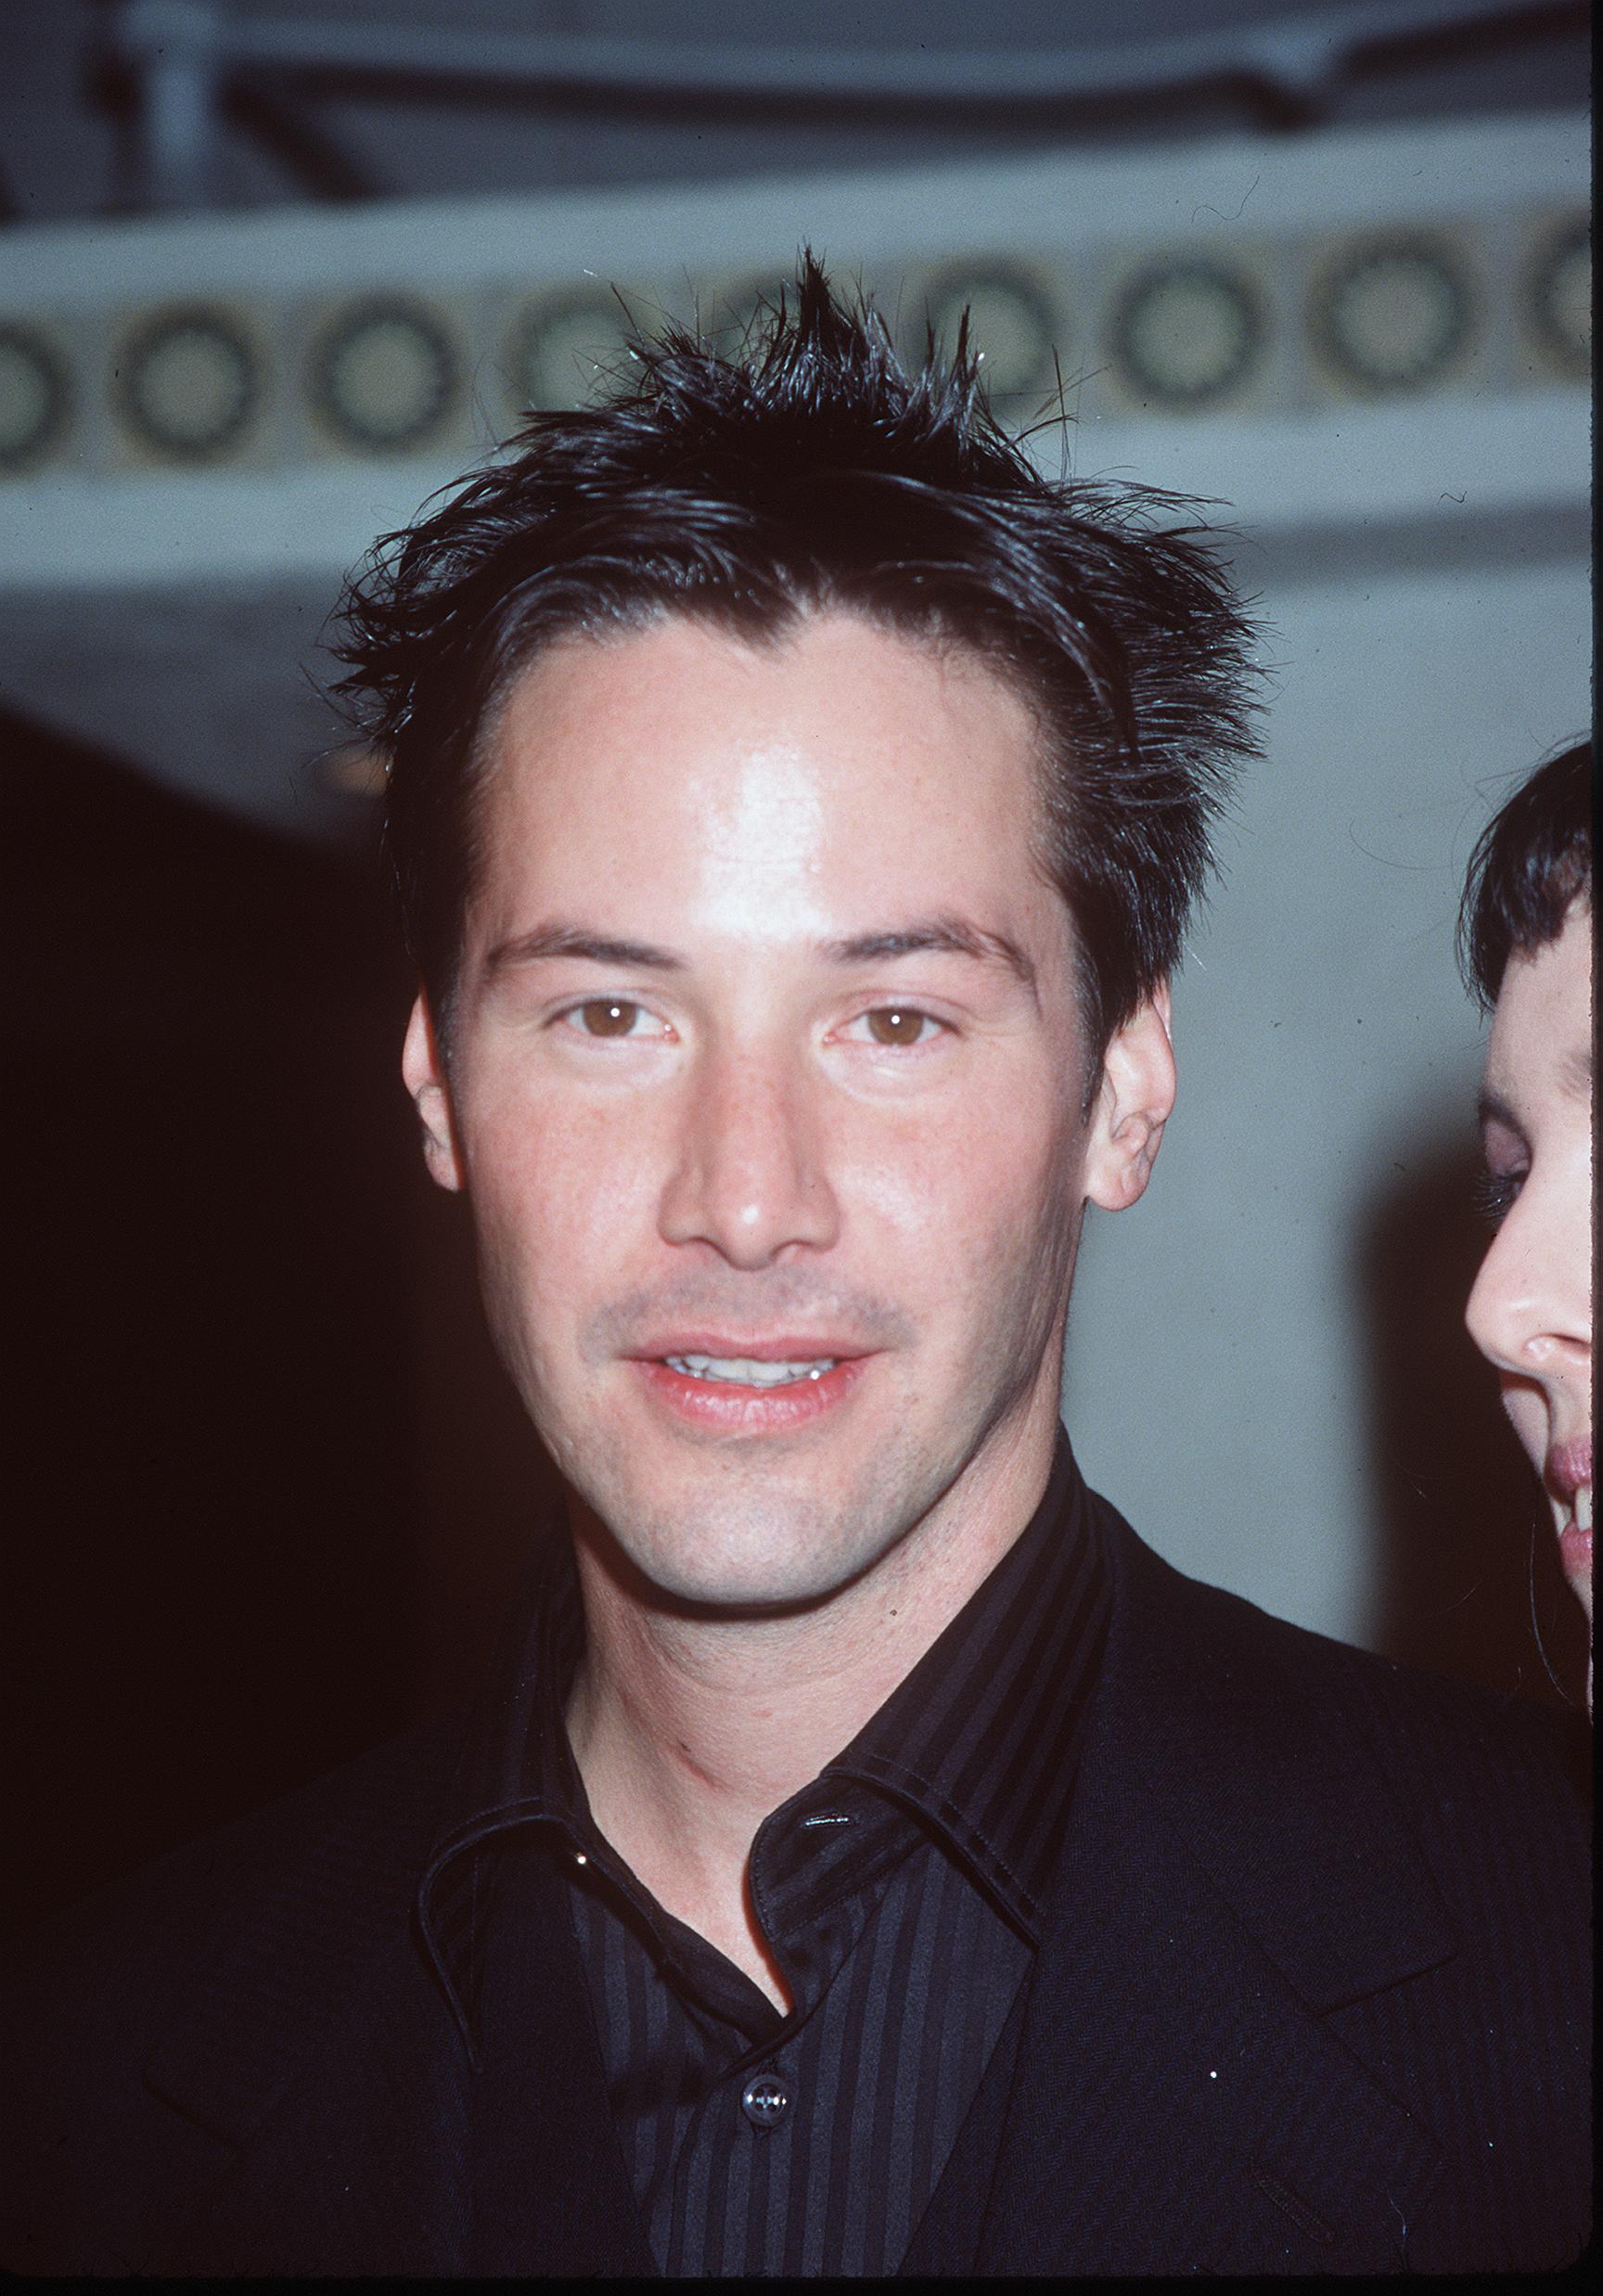 Keanu Reeves arrives at the world premiere showing of the new film "The Matrix" on March 24, 1999, in the Mann's Village Theatre. | Source: Getty Images